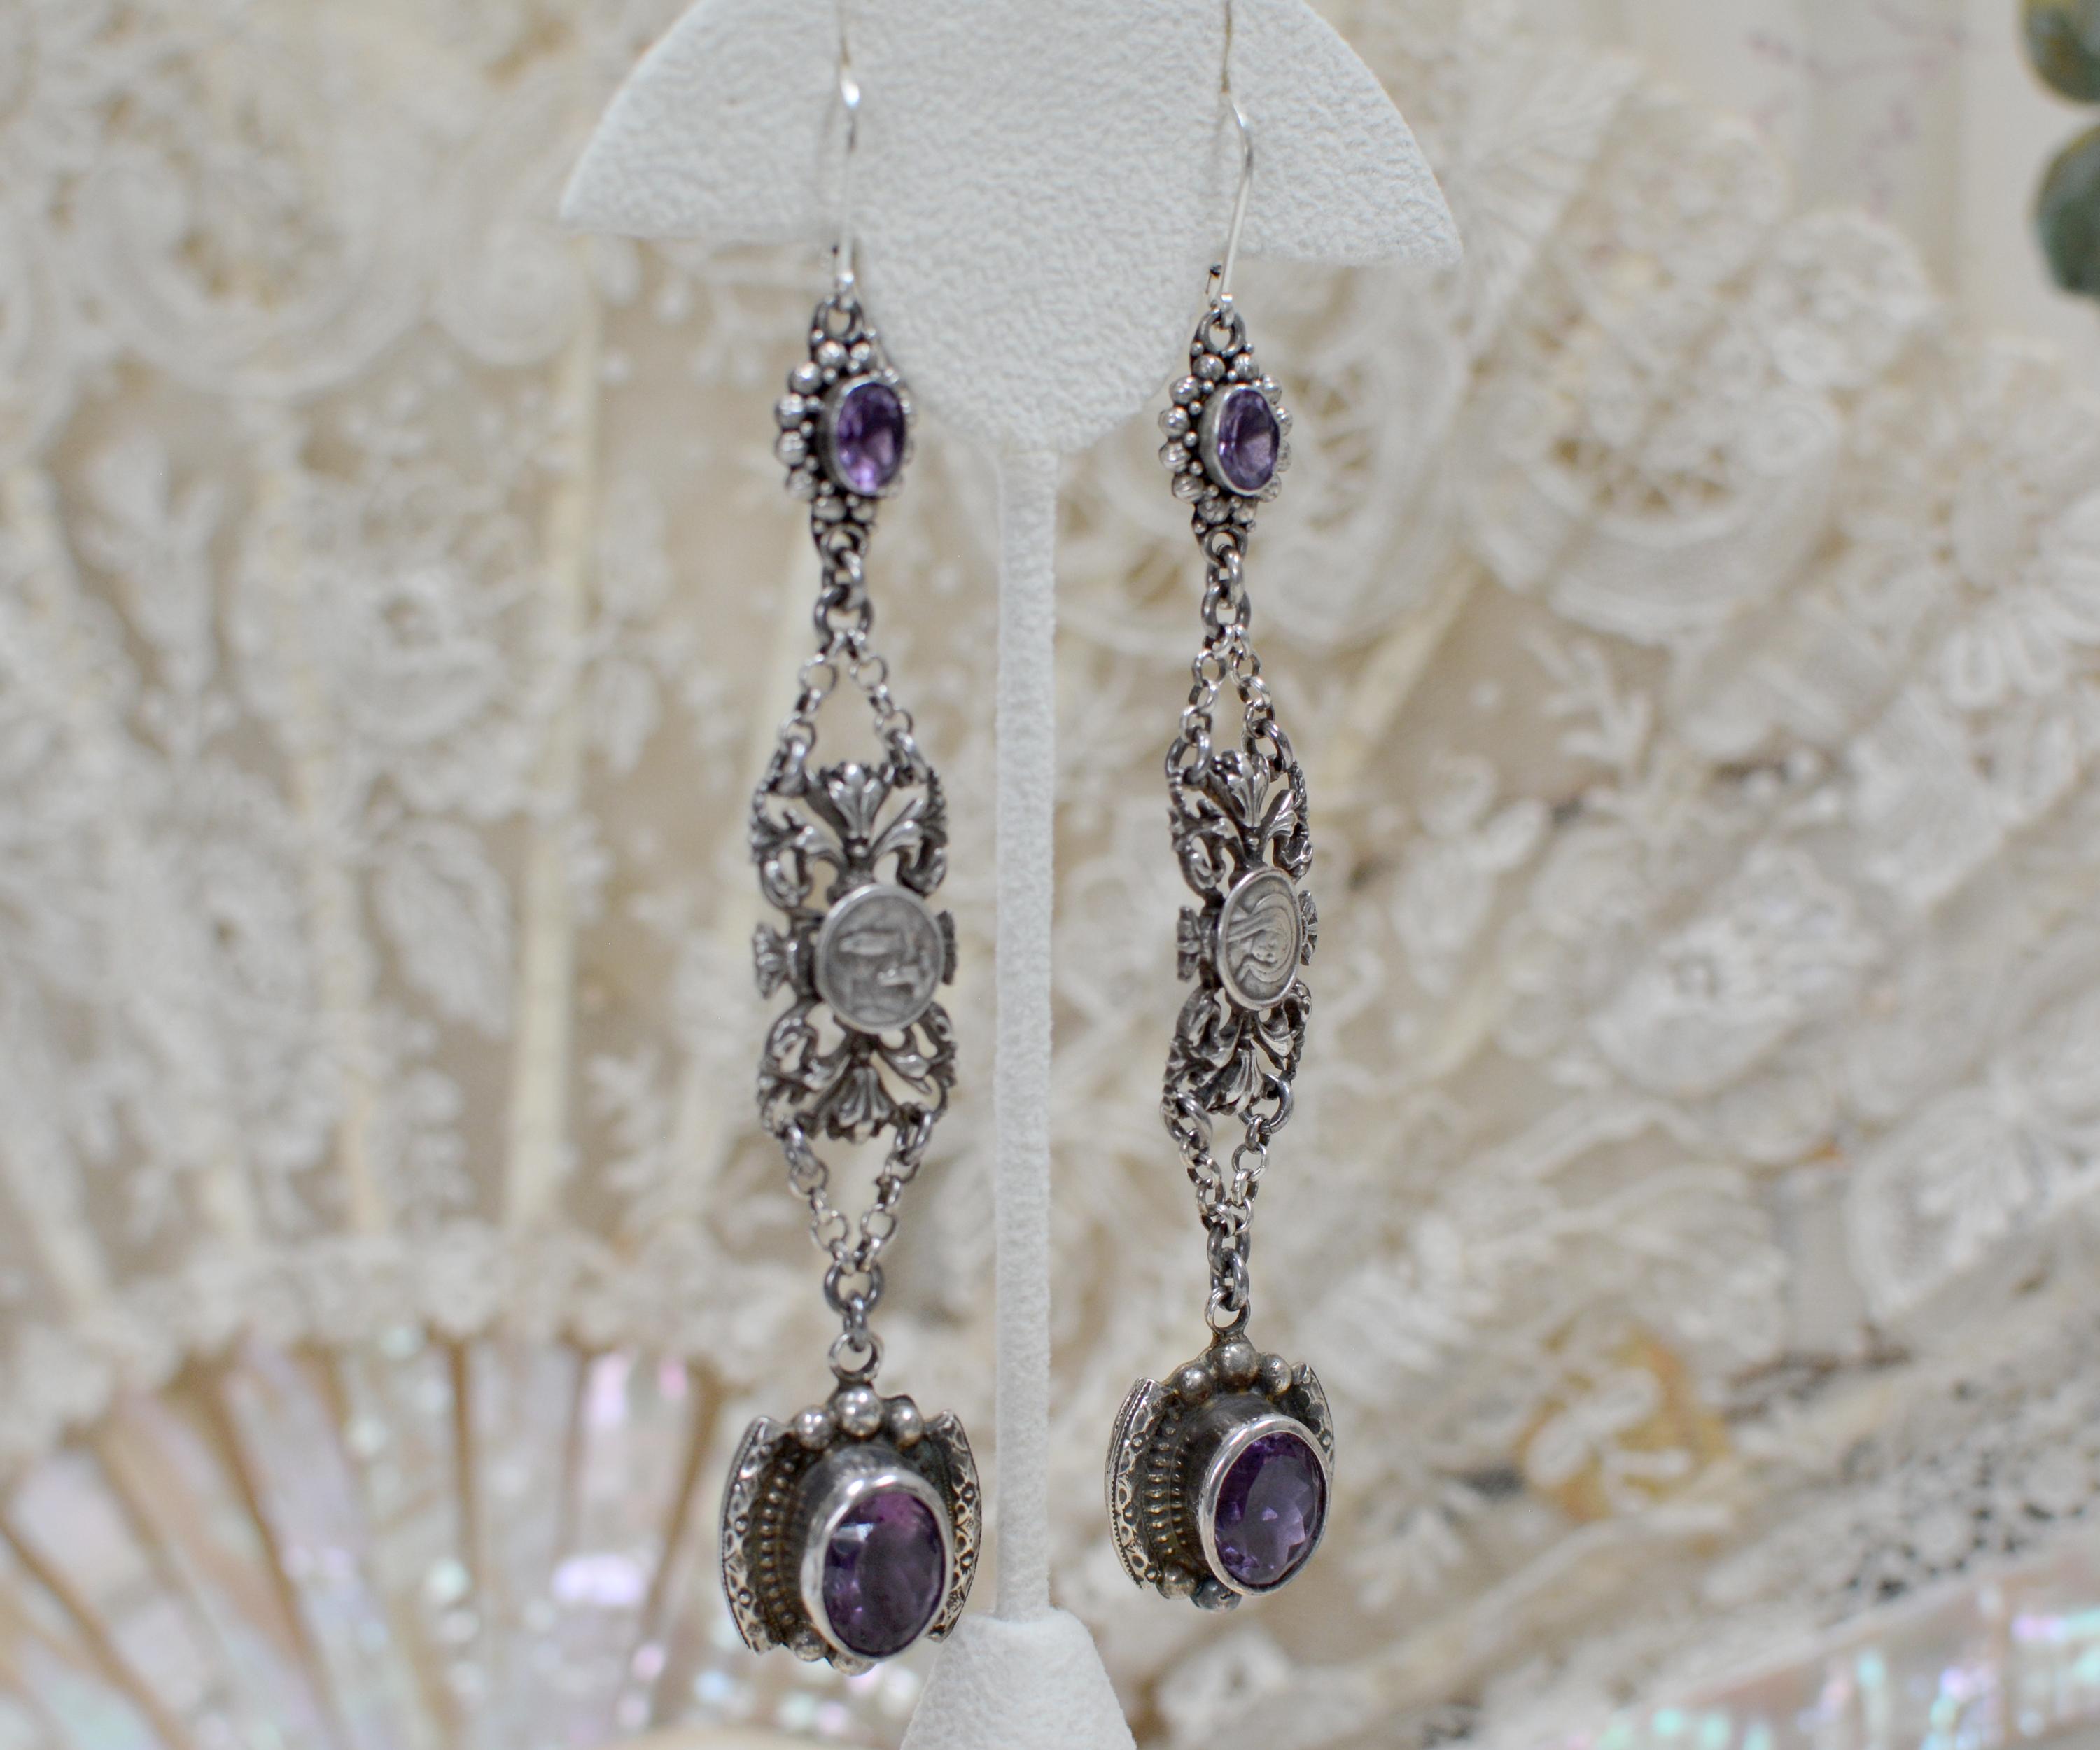 Women's or Men's Jill Garber Amethyst Drop Earrings with Antique French Sacred Heart Medals